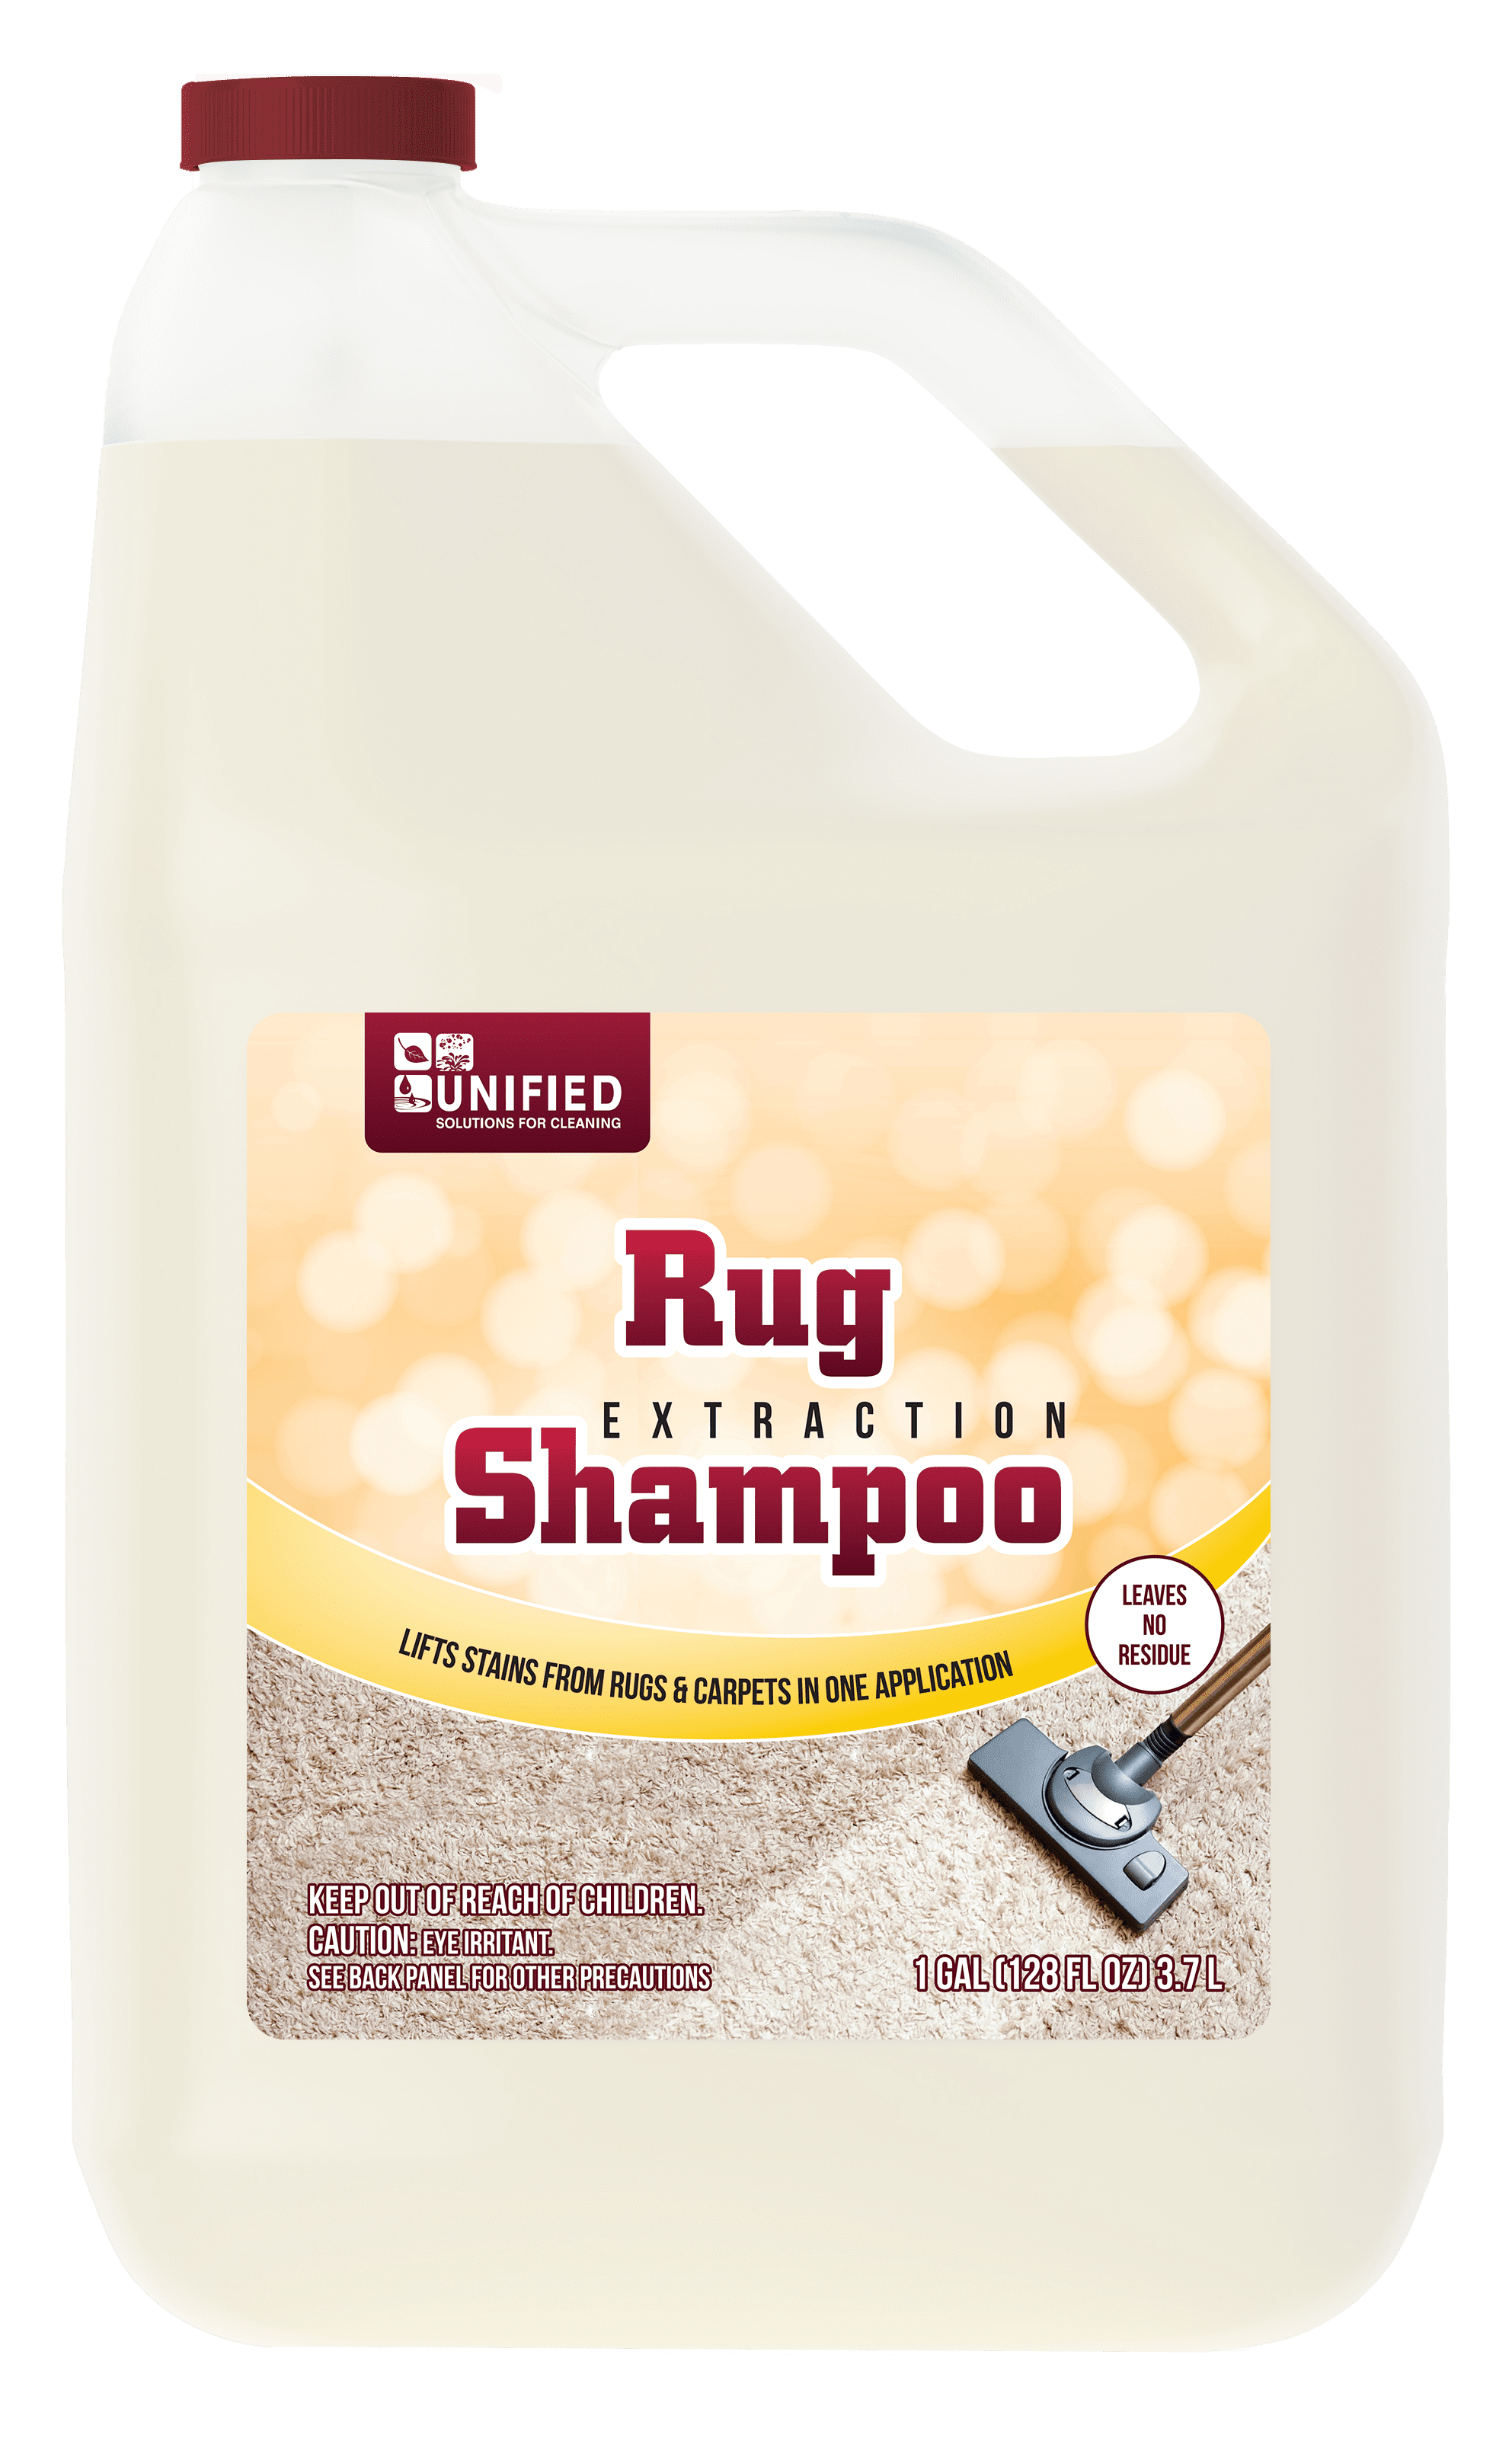 Unified Soloutions For CLeaning_Rug_Shampoo